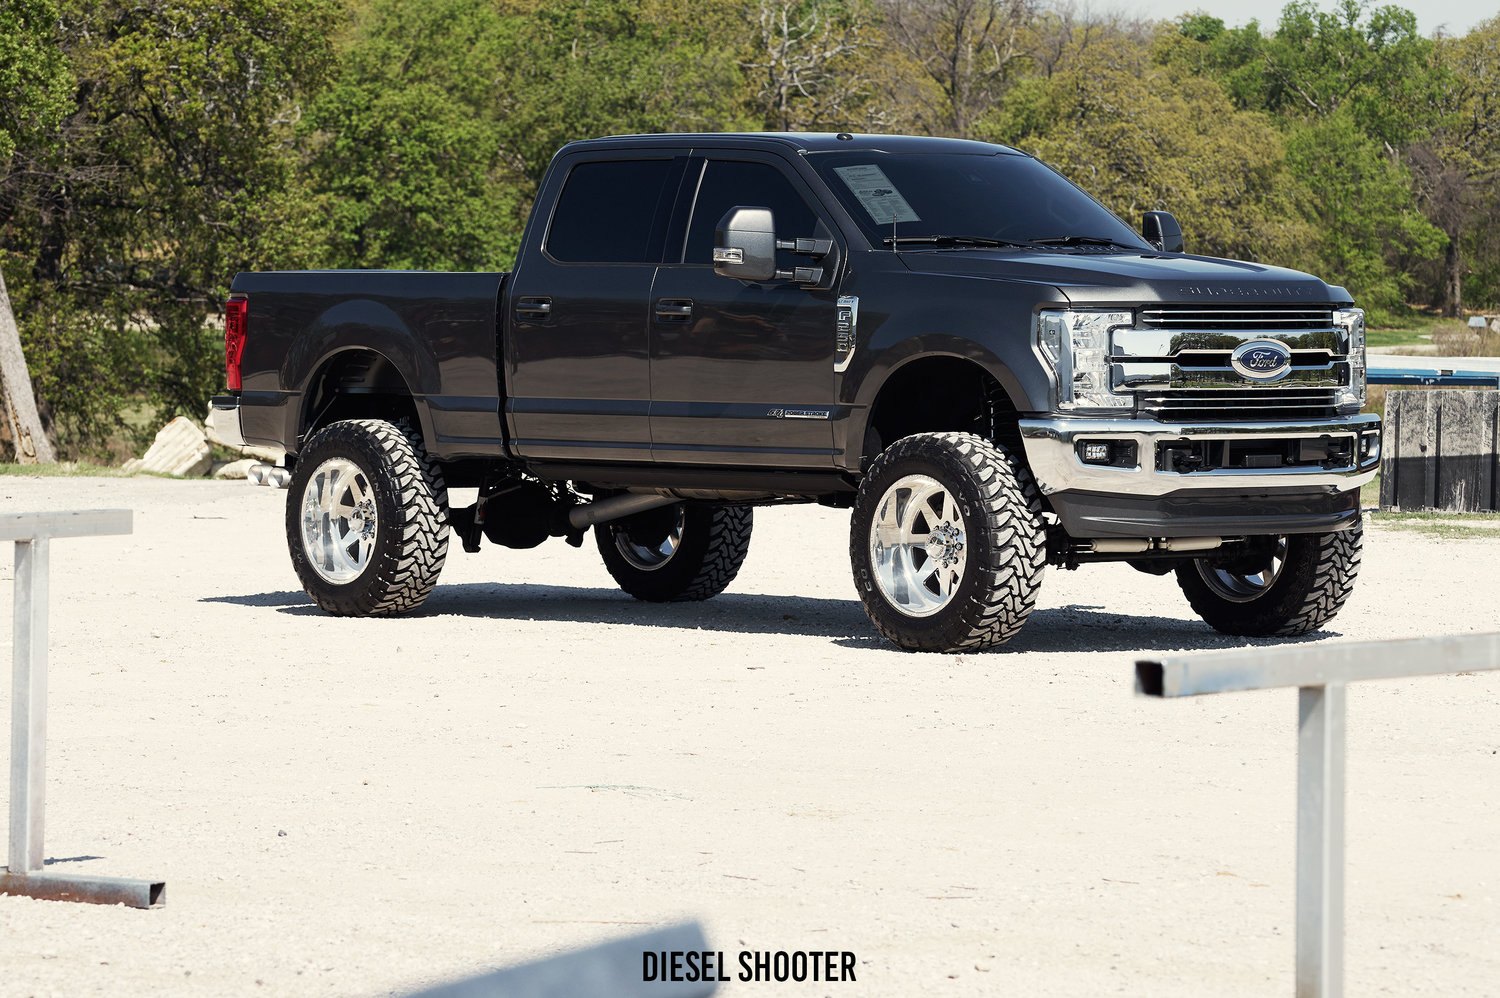 Black Ford F-250 Lariat with 22 Inch American Force Wheels - Photo by Diesel Shooter